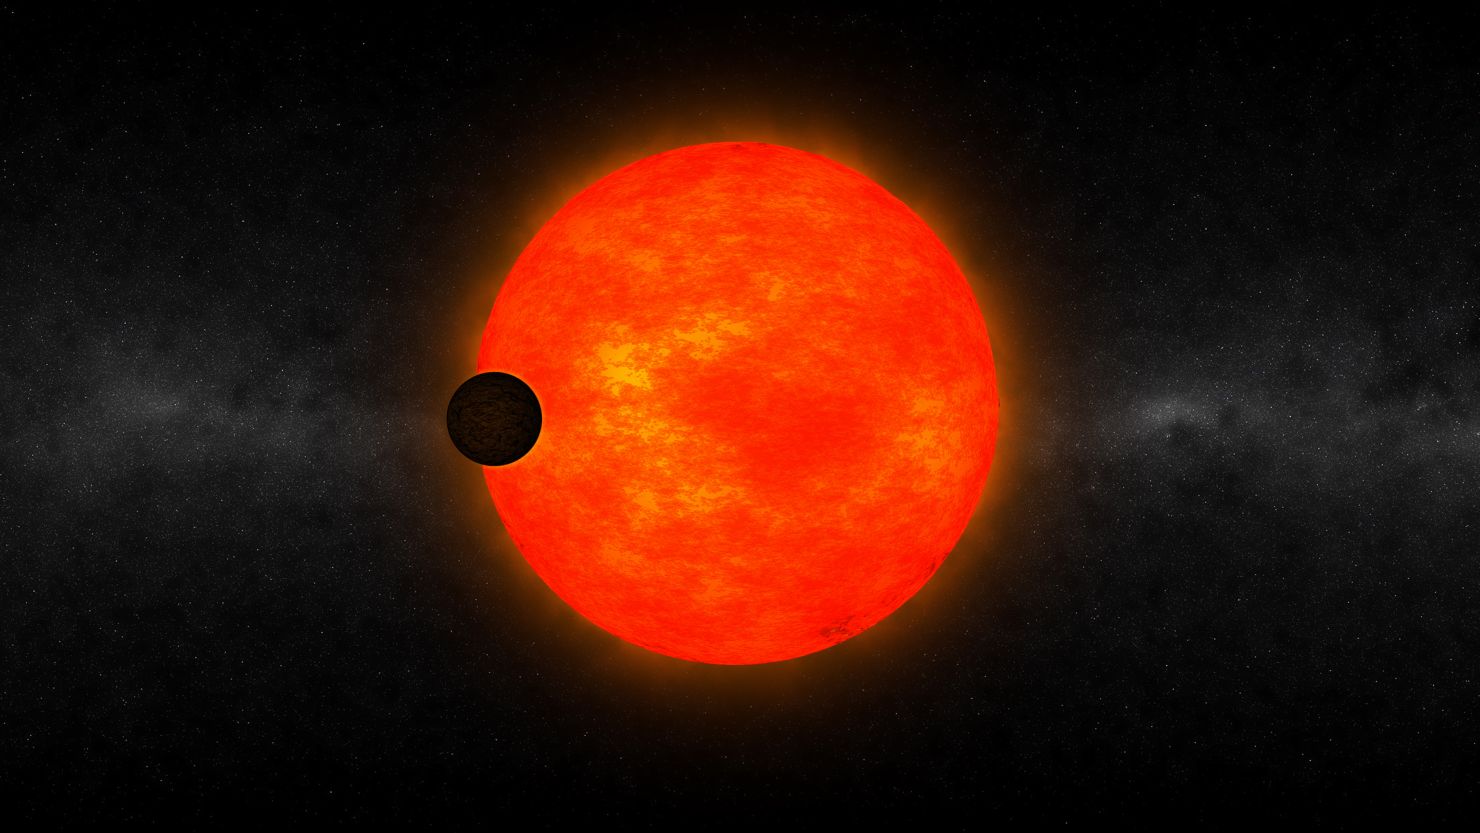 Australian astronomers have discovered a strange exoplanet orbiting a small cool star -- HATS-6 -- 500 light years away.